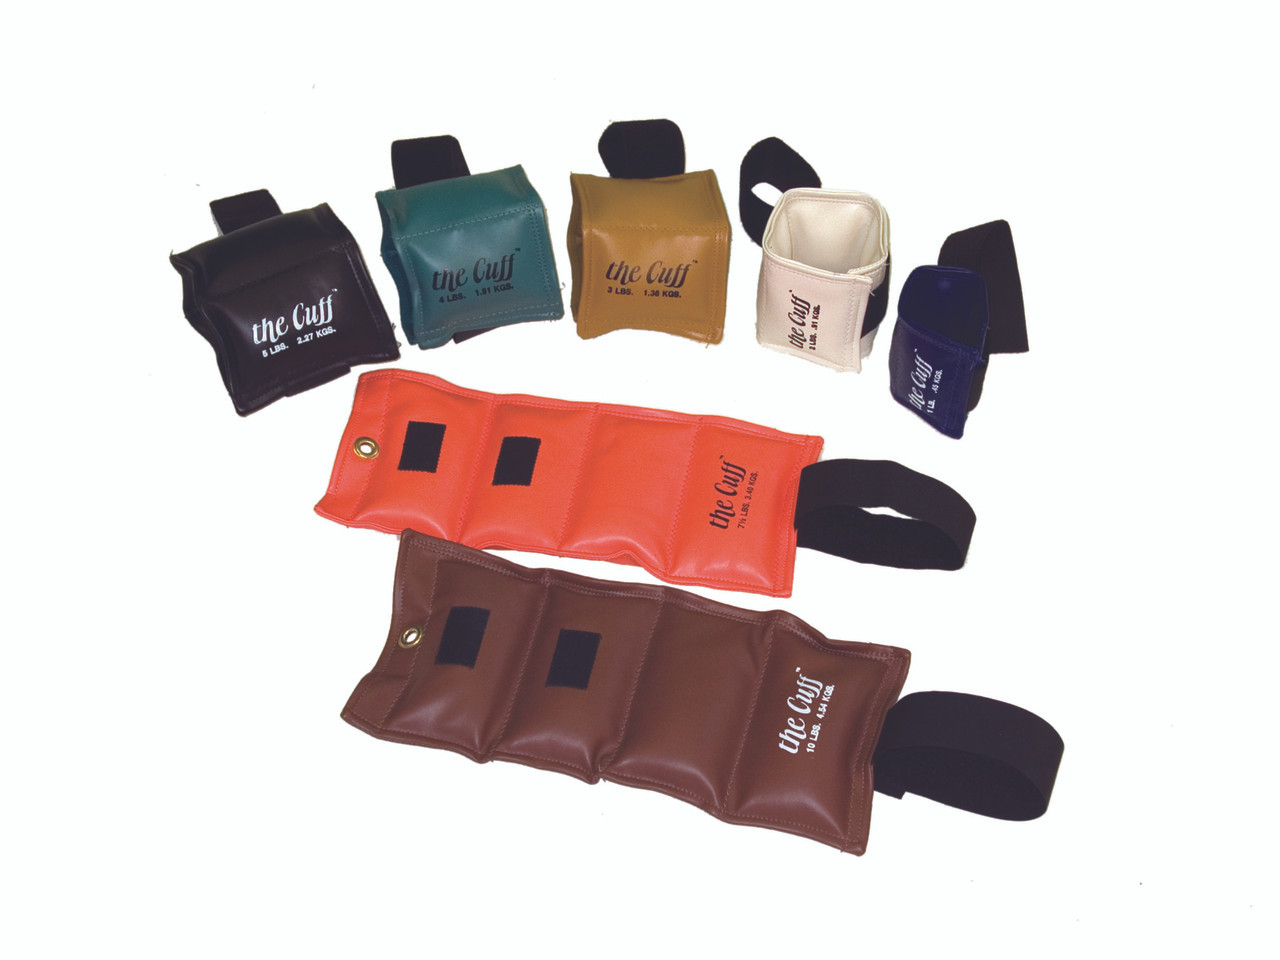 The Cuff¨ Deluxe Ankle and Wrist Weight - 7 Piece Set - 1 each 1, 2, 3, 4, 5, 7.5, 10 lb